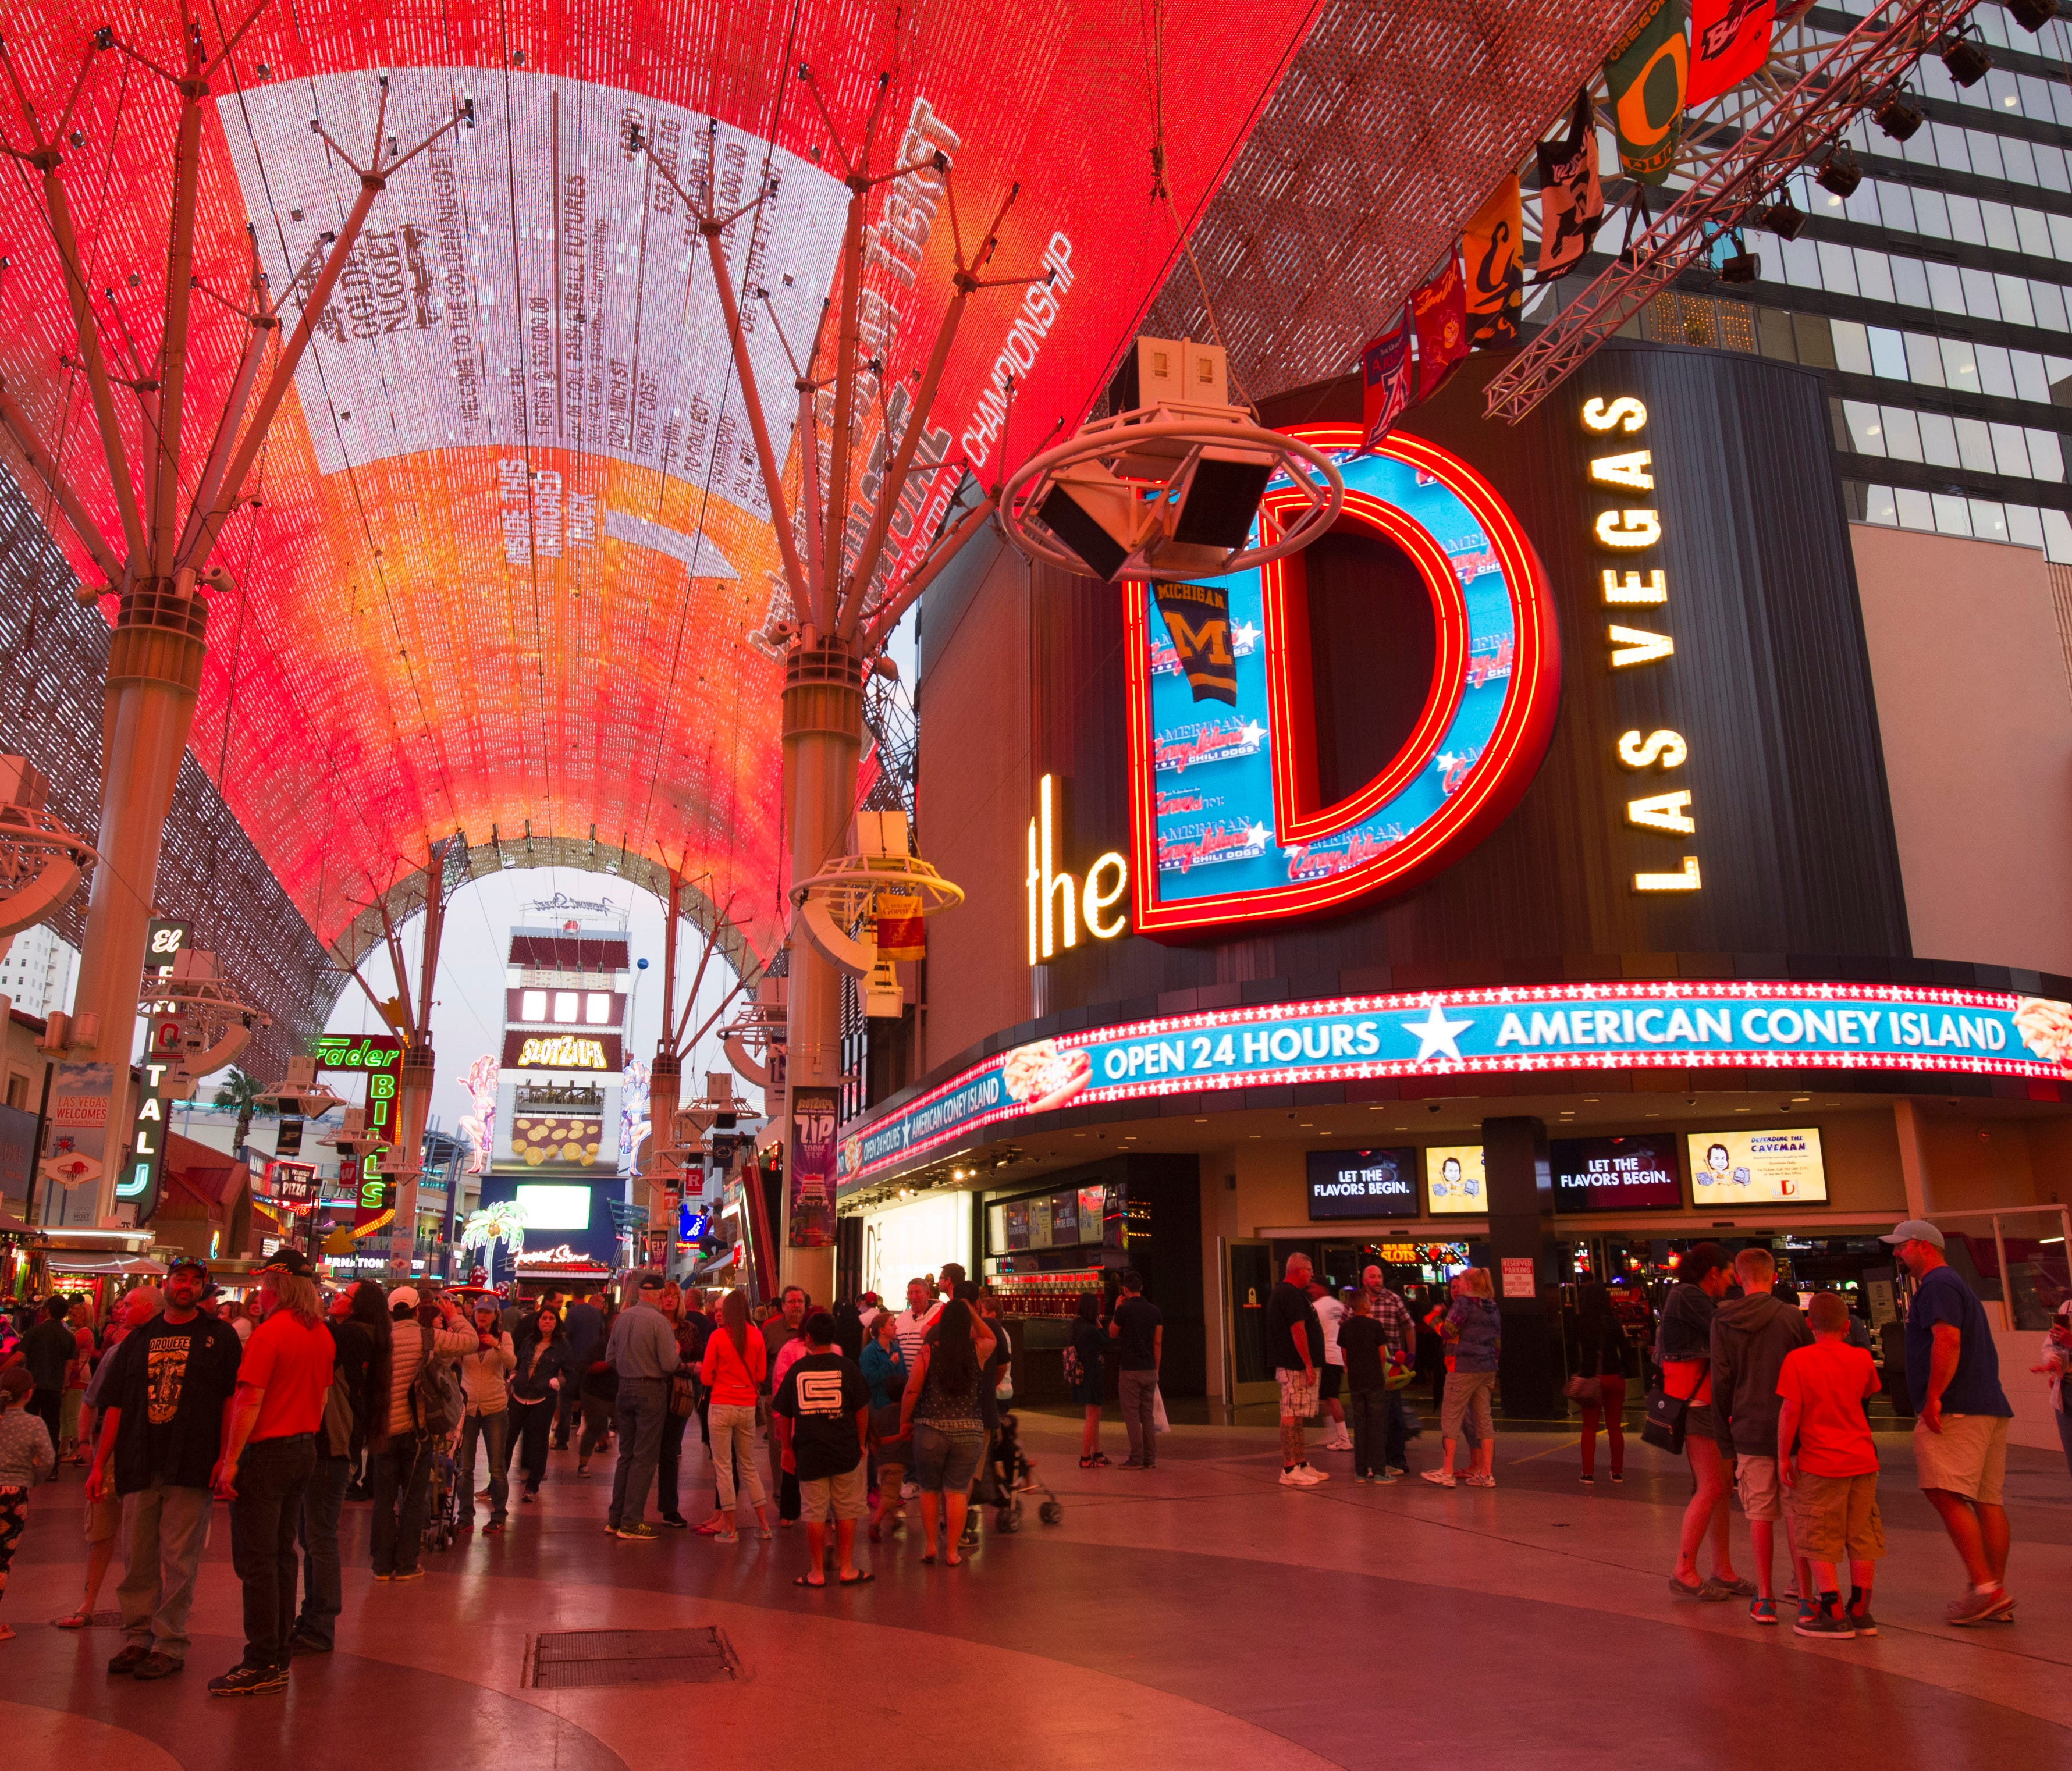 Find The D Las Vegas right inside the Fremont Street Experience downtown.